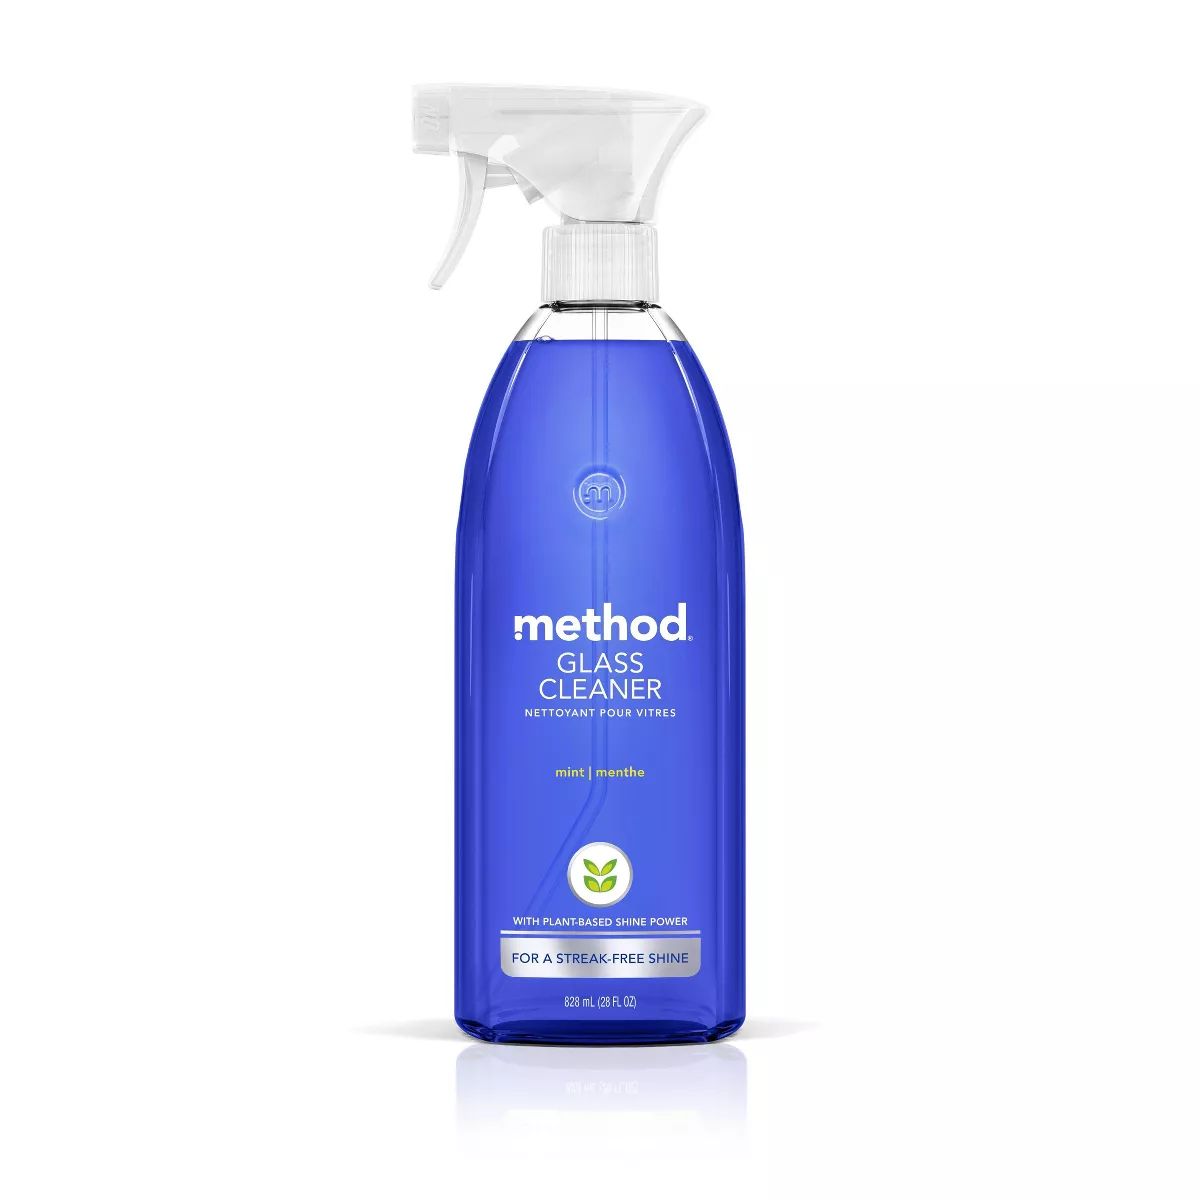 Method Mint Cleaning Products Glass Cleaner Spray Bottle - 28 fl oz | Target